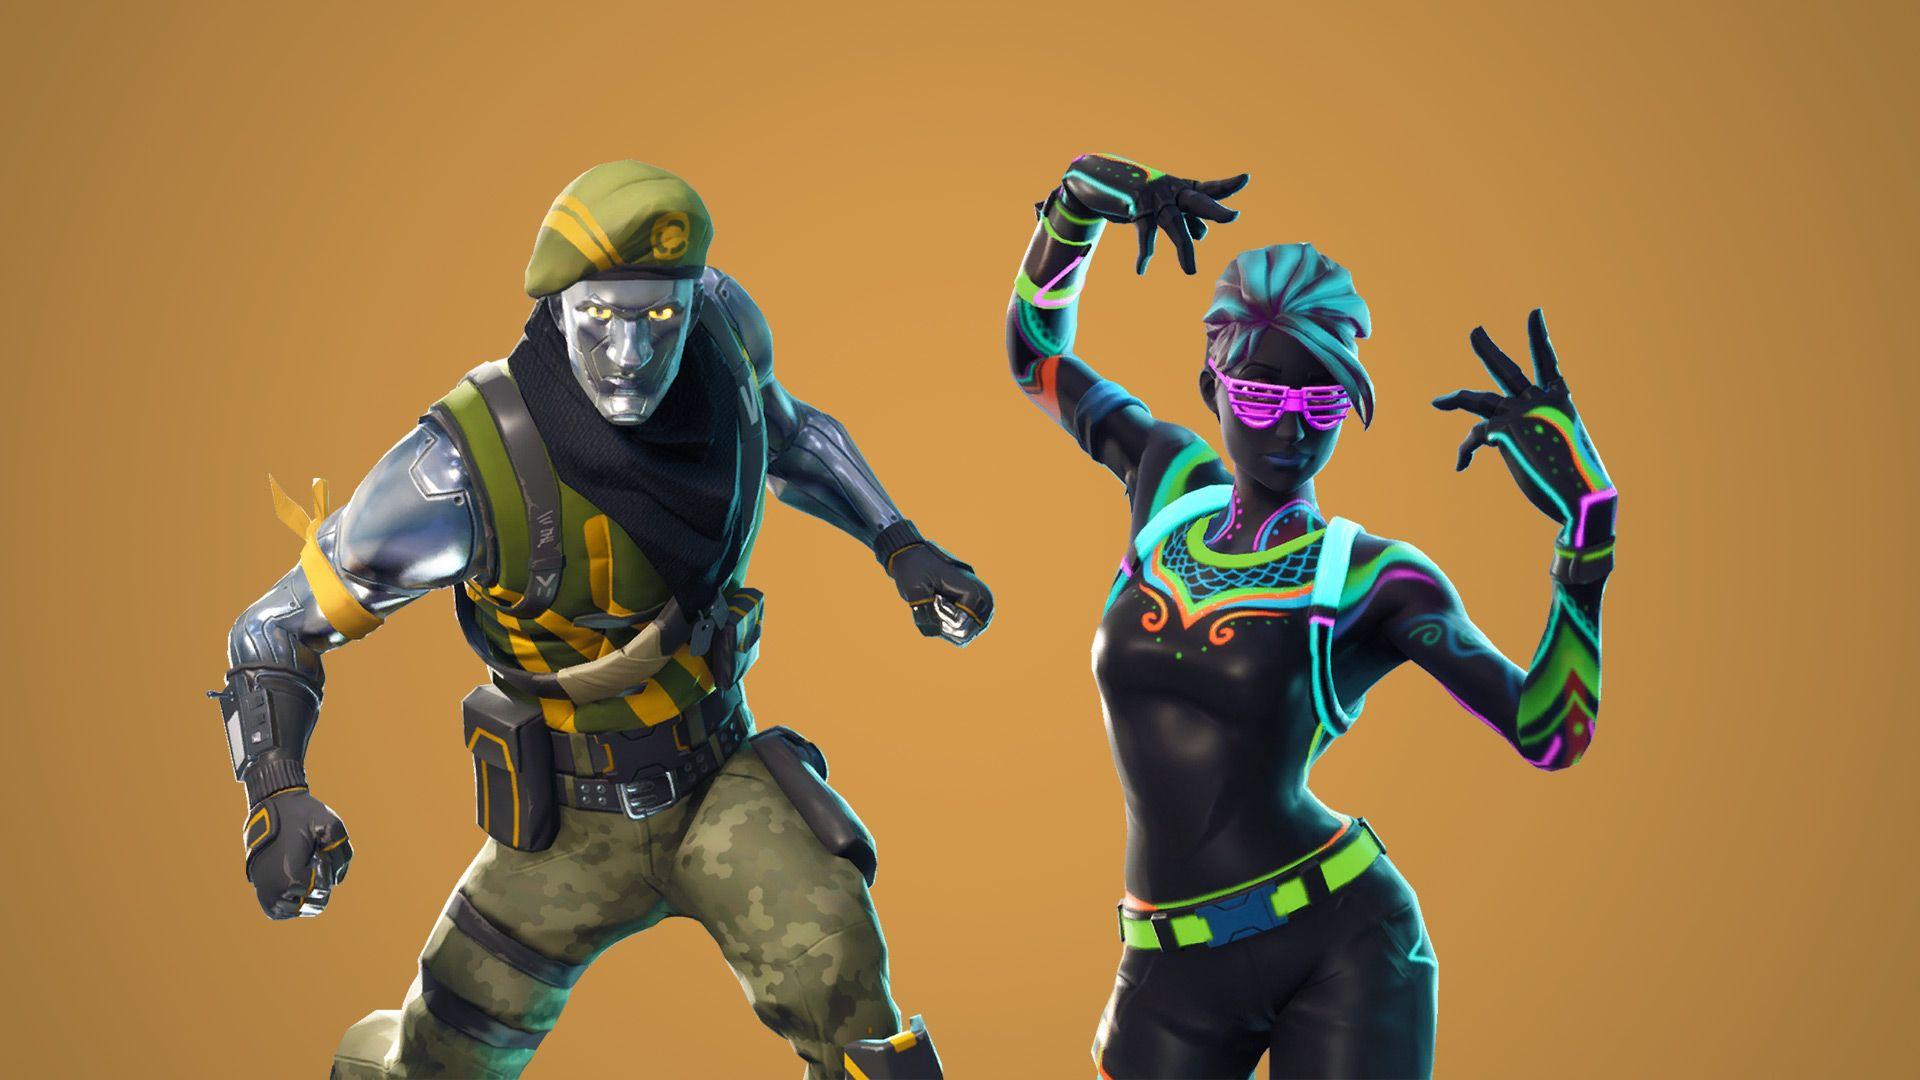 Upcoming cosmetics found in Patch v4.0.0 files